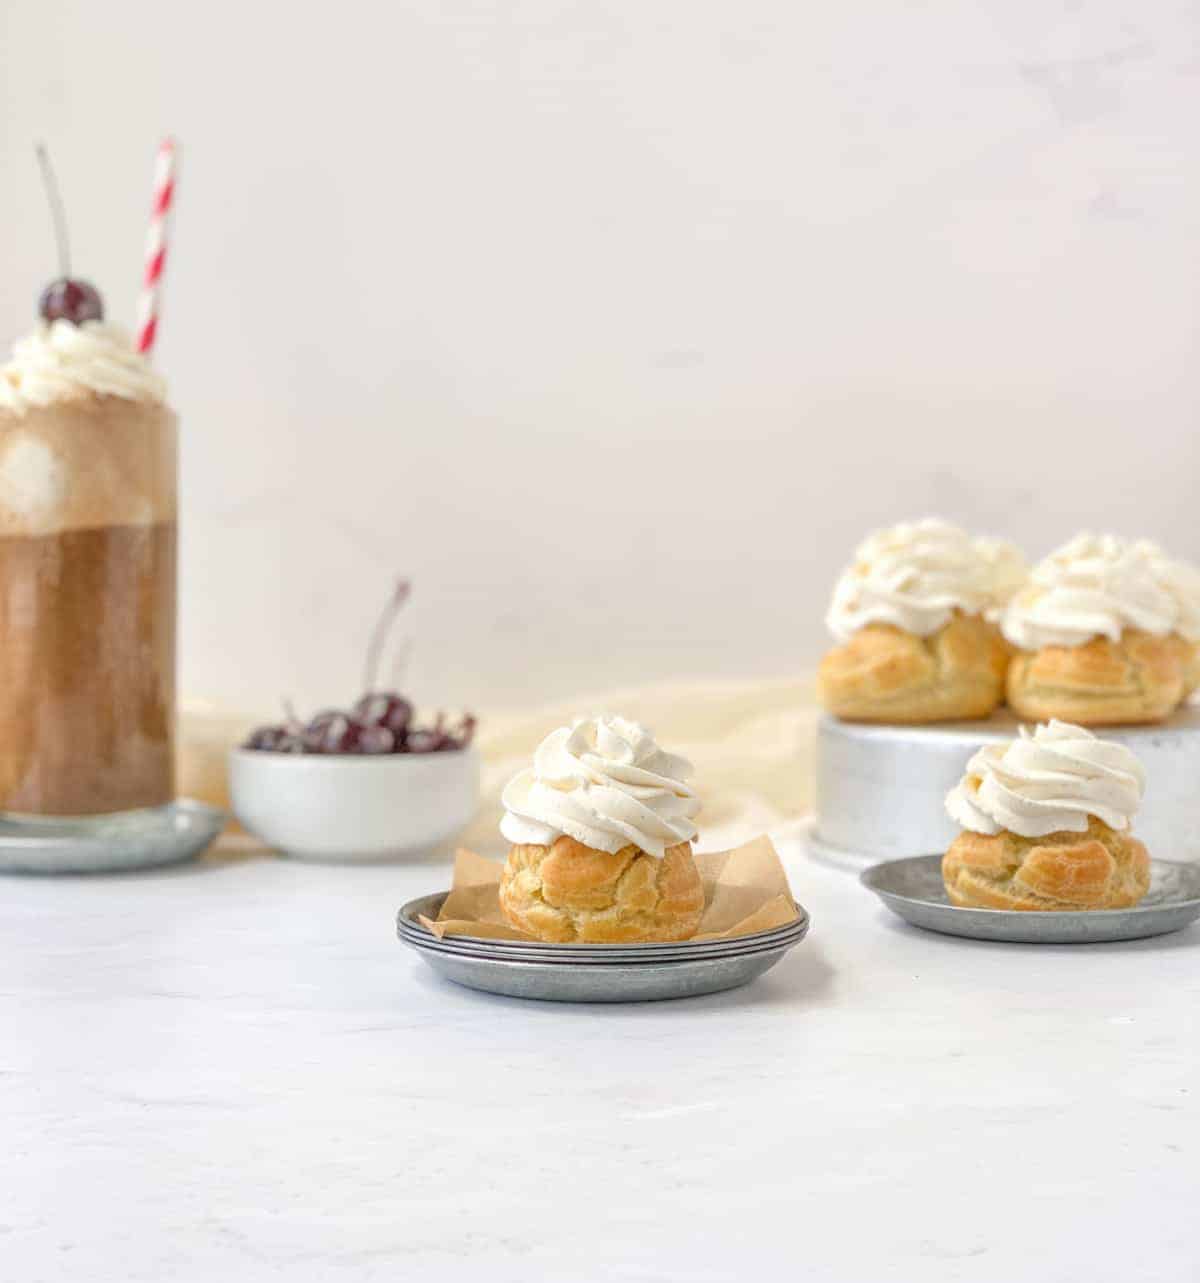 Root Beer Float Cream Puffs with whipped cream on top with more cream puffs, cherries, and a root beer float in the background